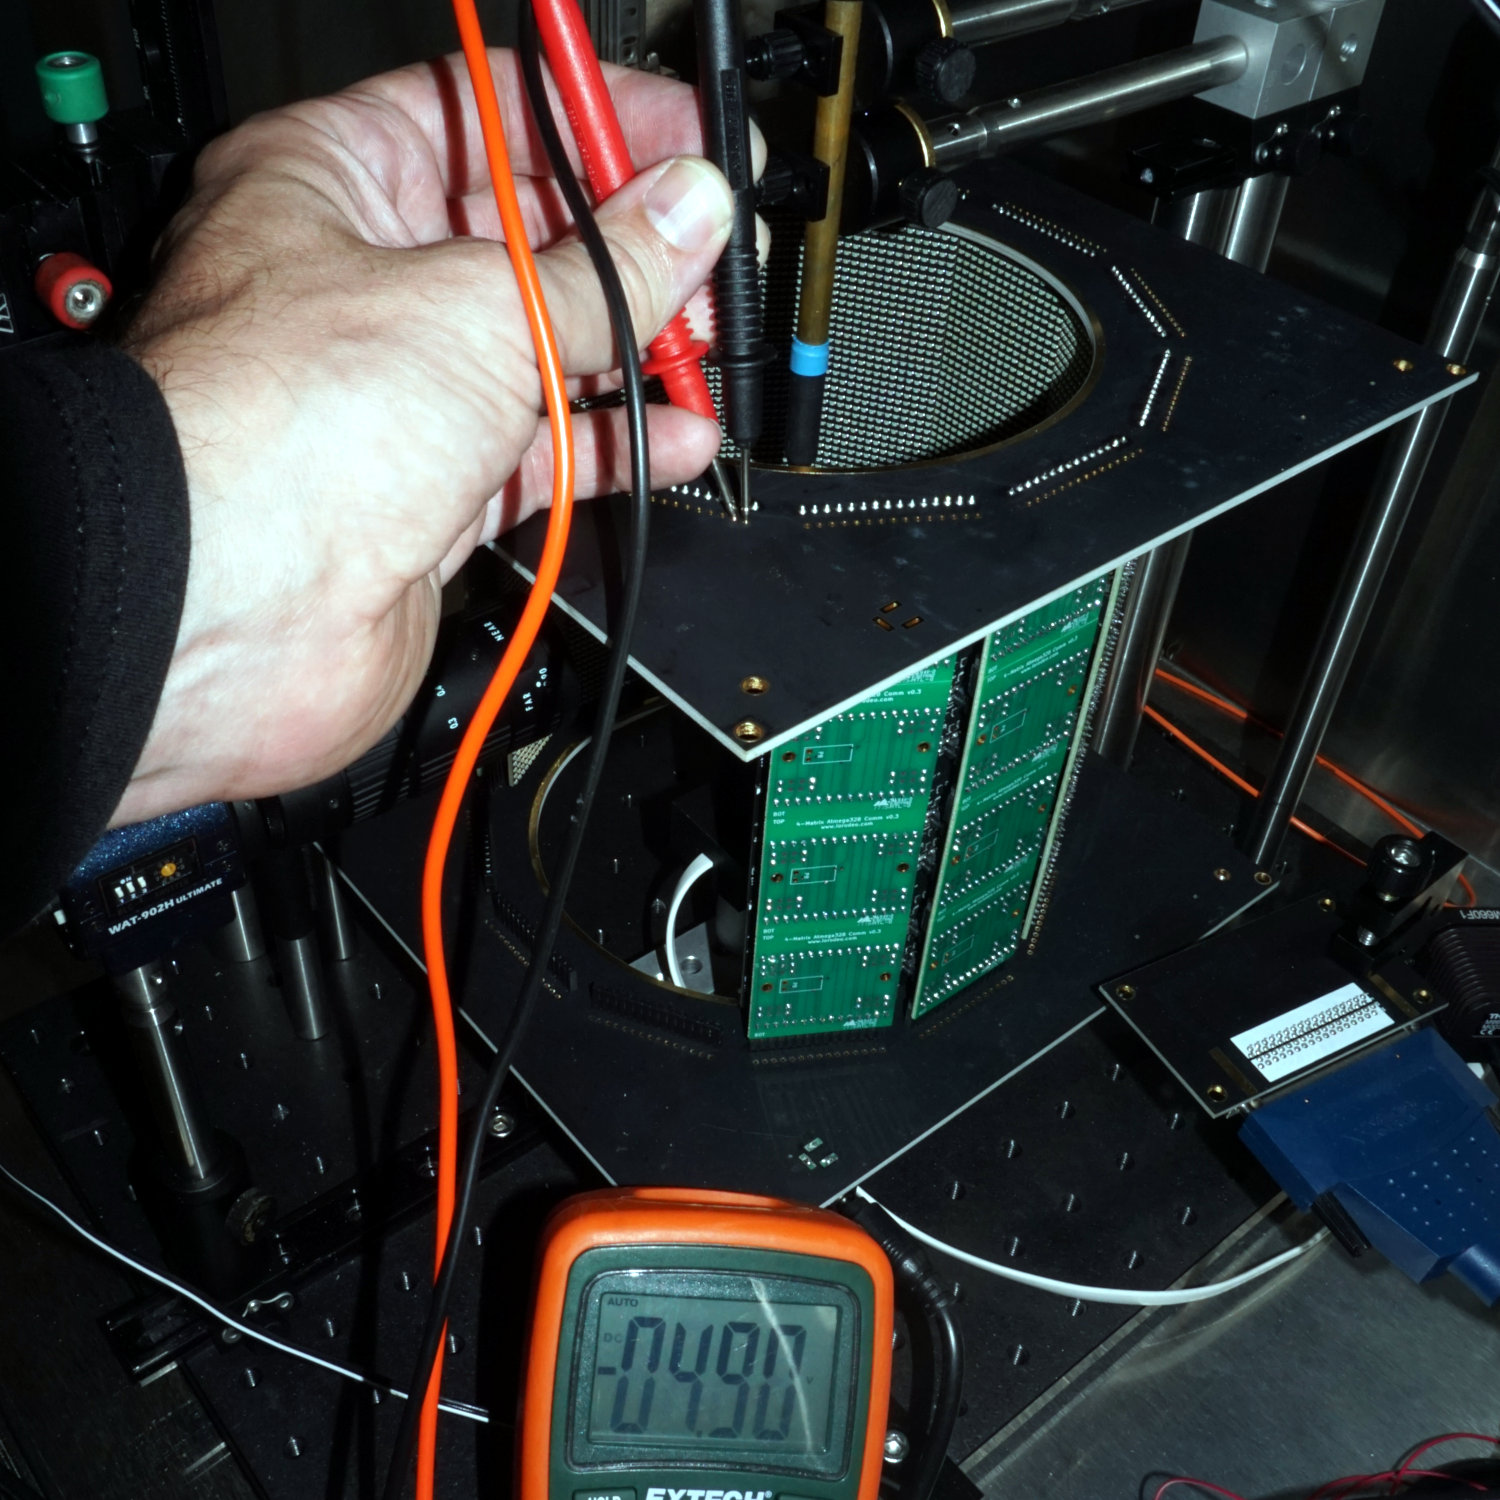 Measuring power supply on an arena